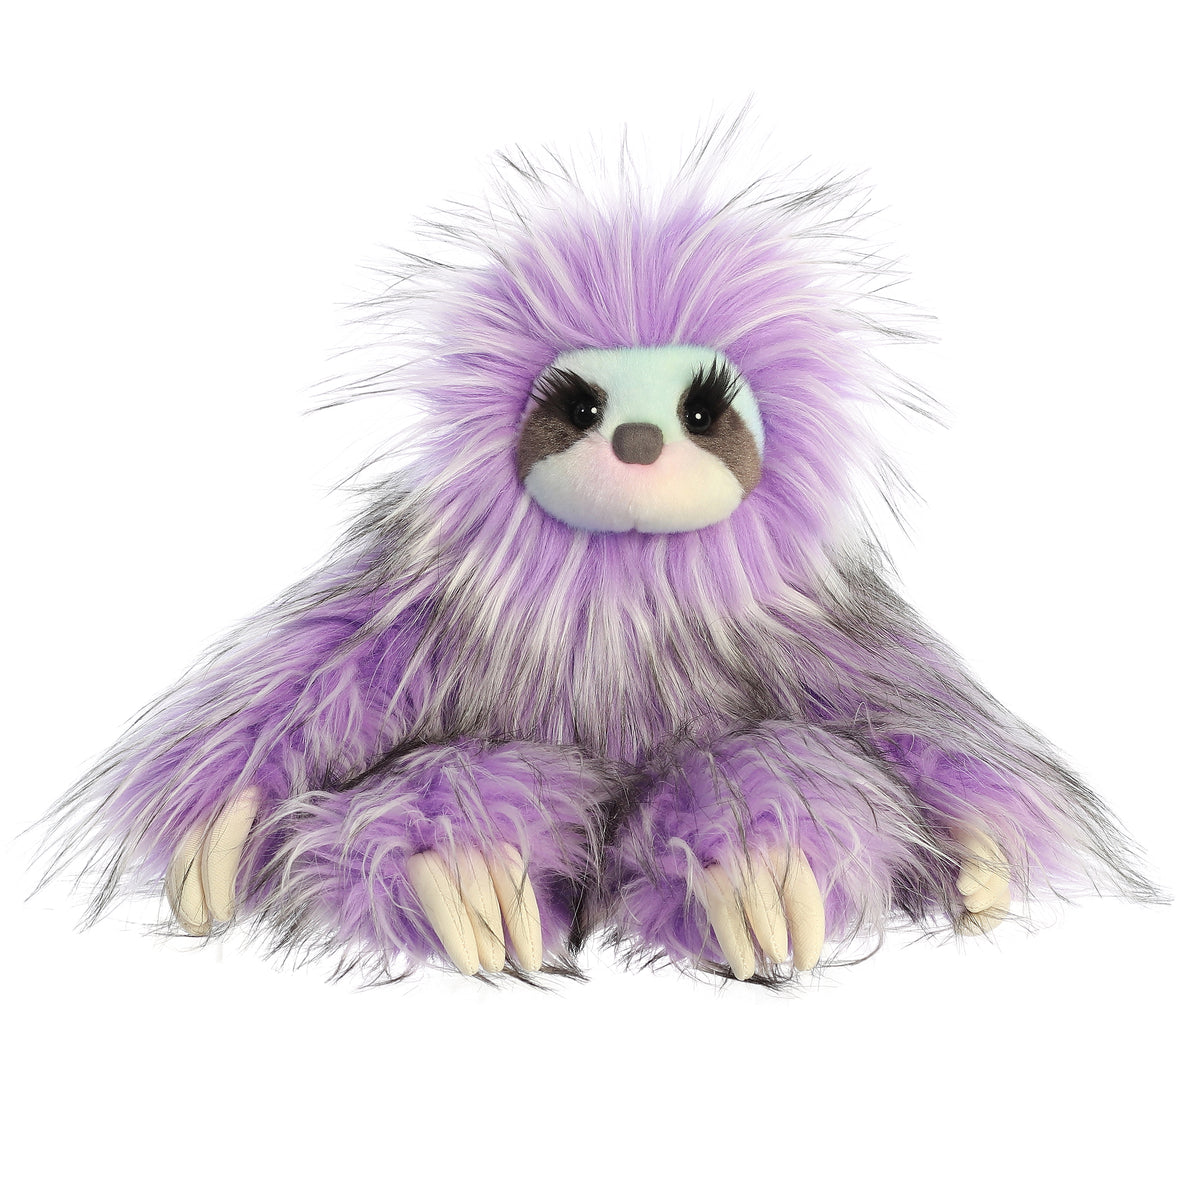 A luxurious, long-haired purple sloth stuffed animal that has soft undertones and lusciously long eyelashes.